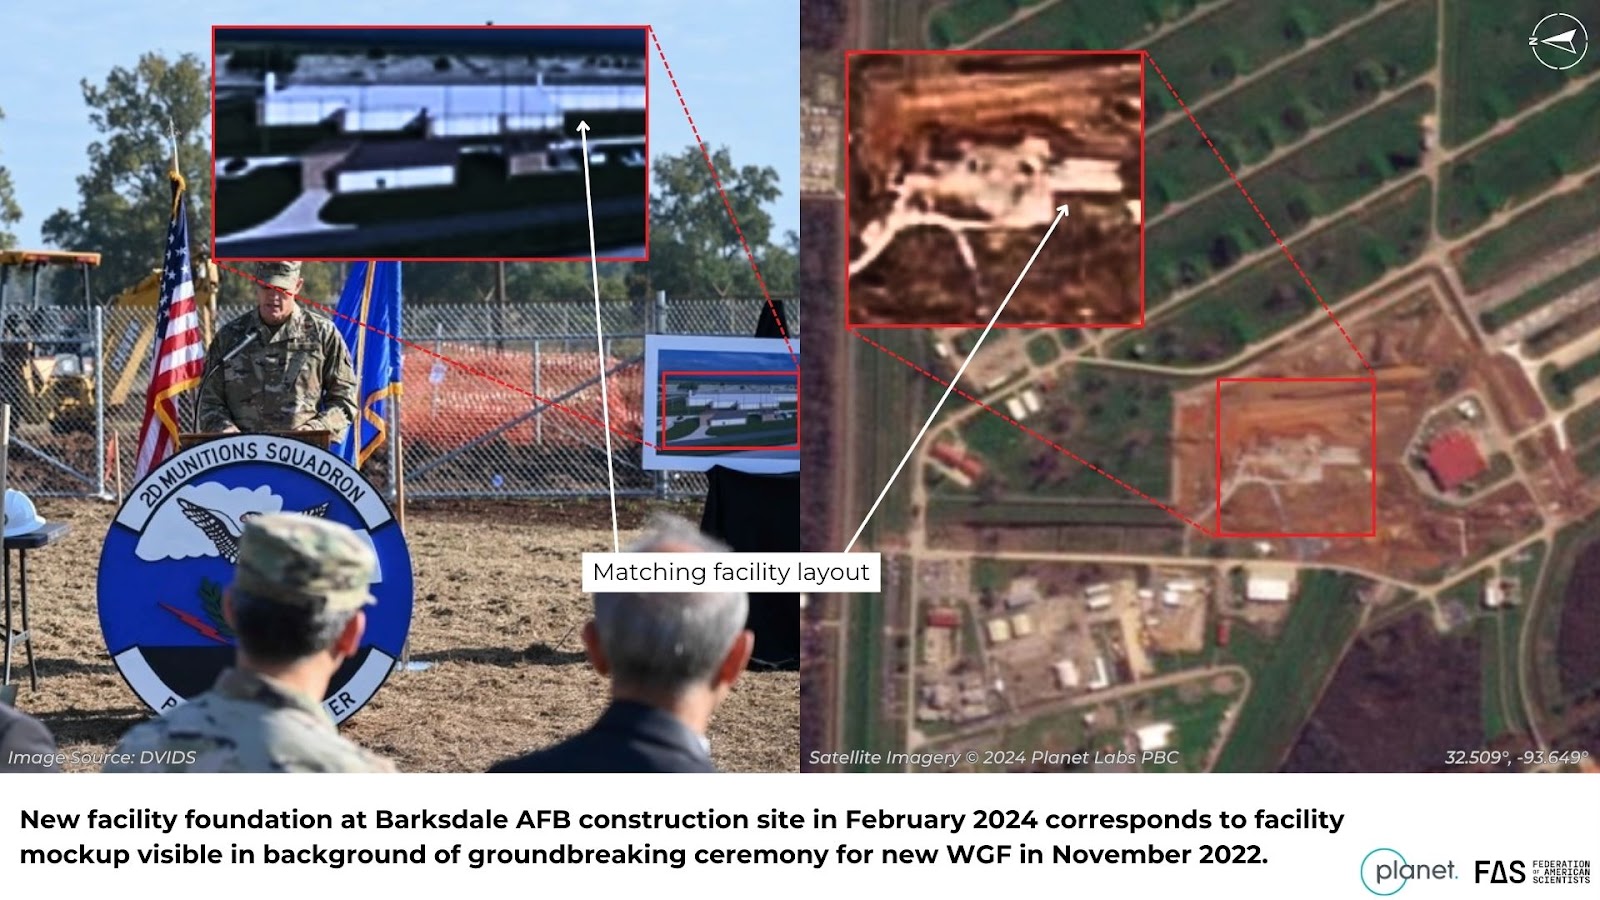 New facility foundation at Barksdale AFB construction site in February 2024 corresponds to facility mockup visible in background of groundbreaking ceremony for new WF in November 2022.